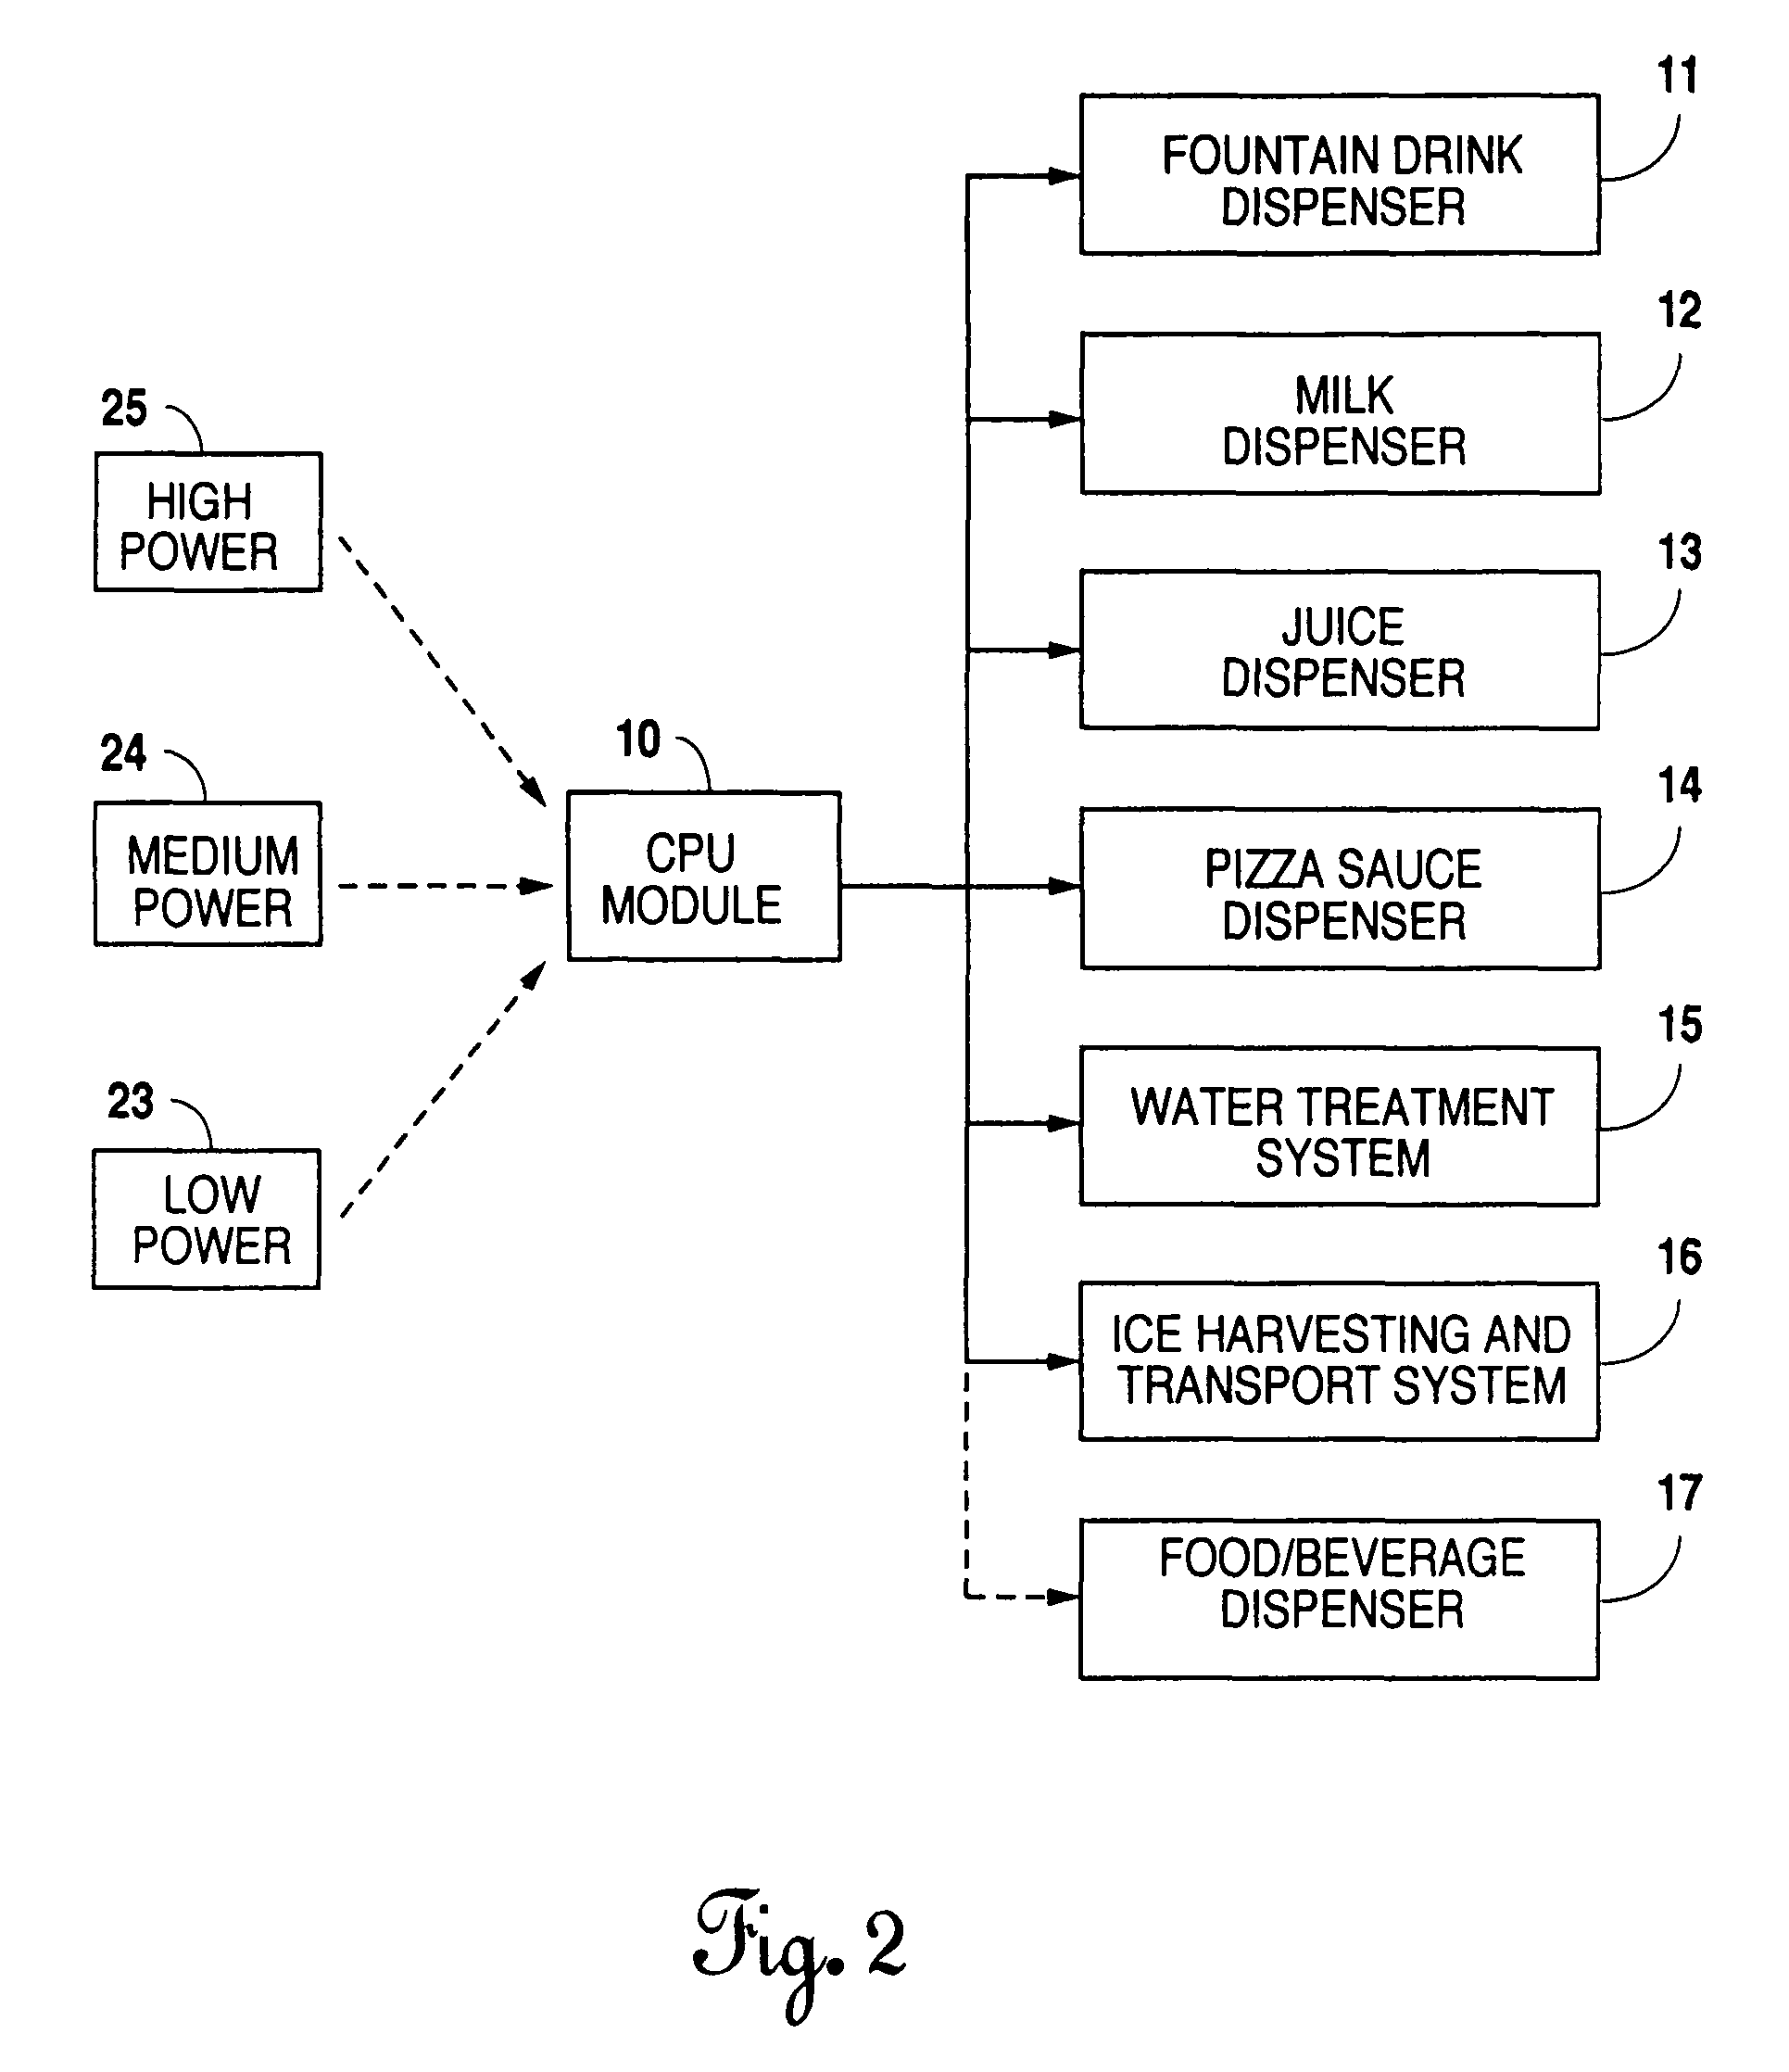 Distributed architecture for food and beverage dispensers